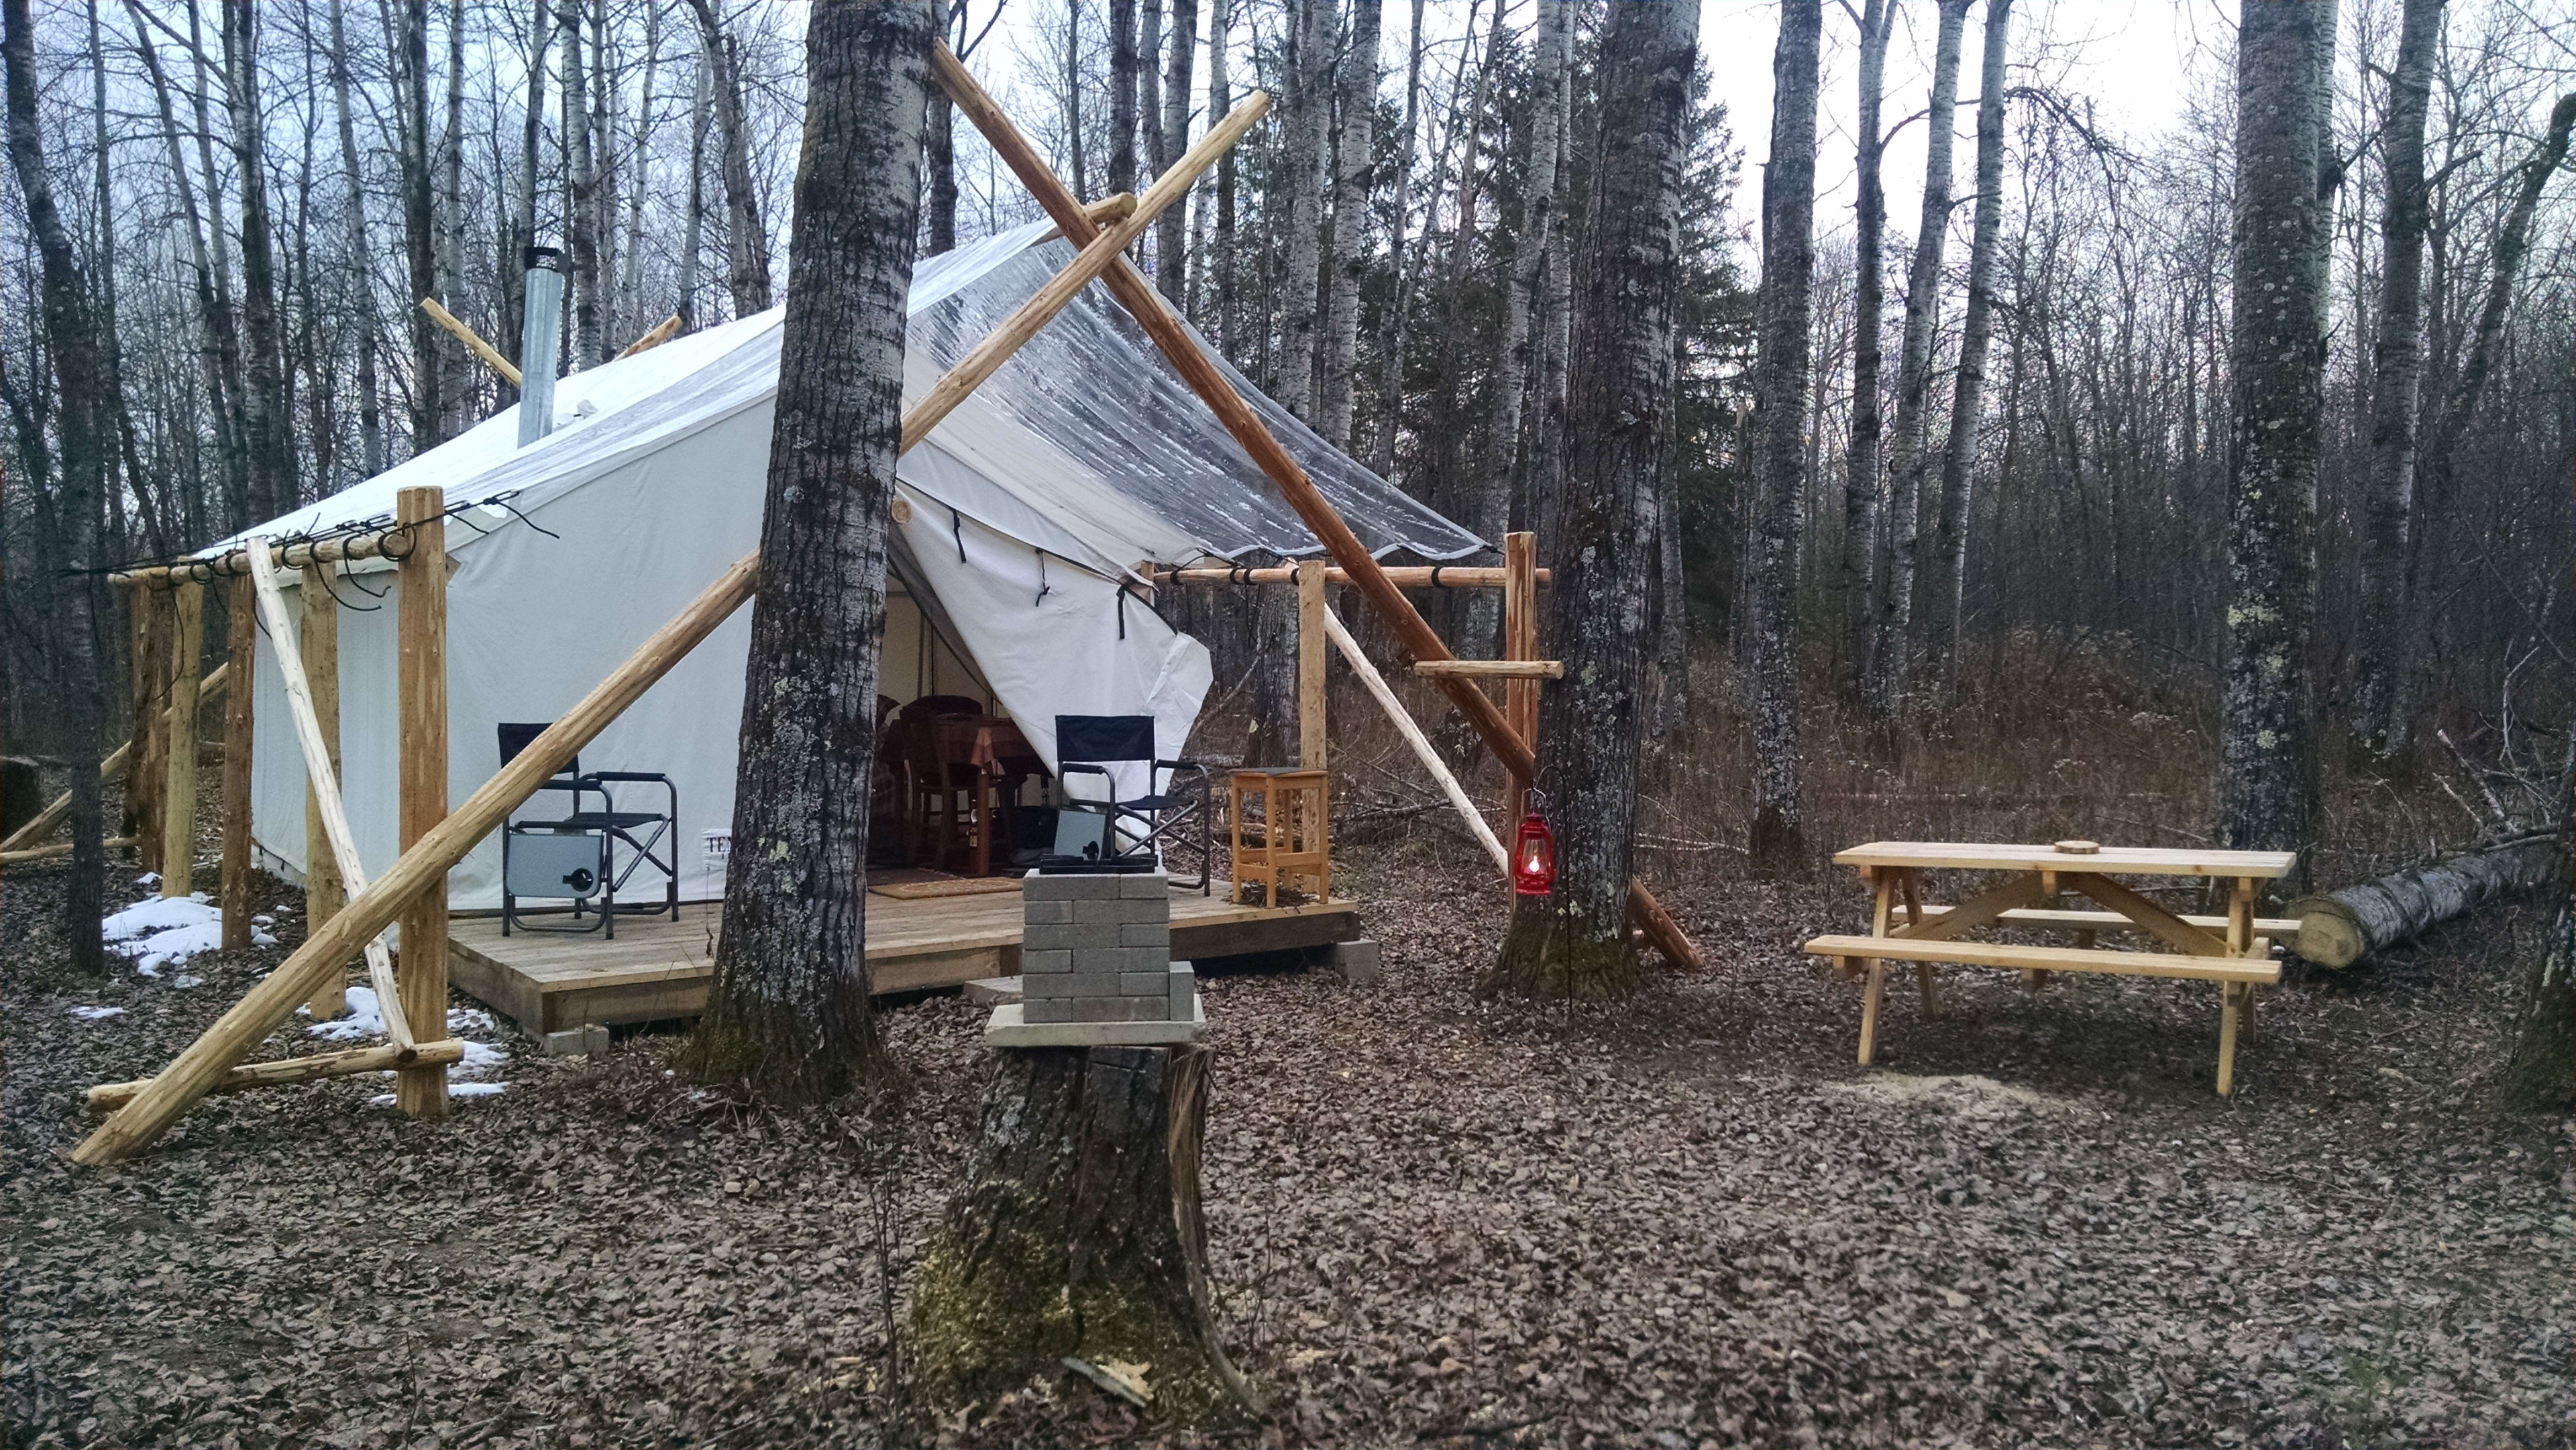 Picnic table and rocket stove are right out your door